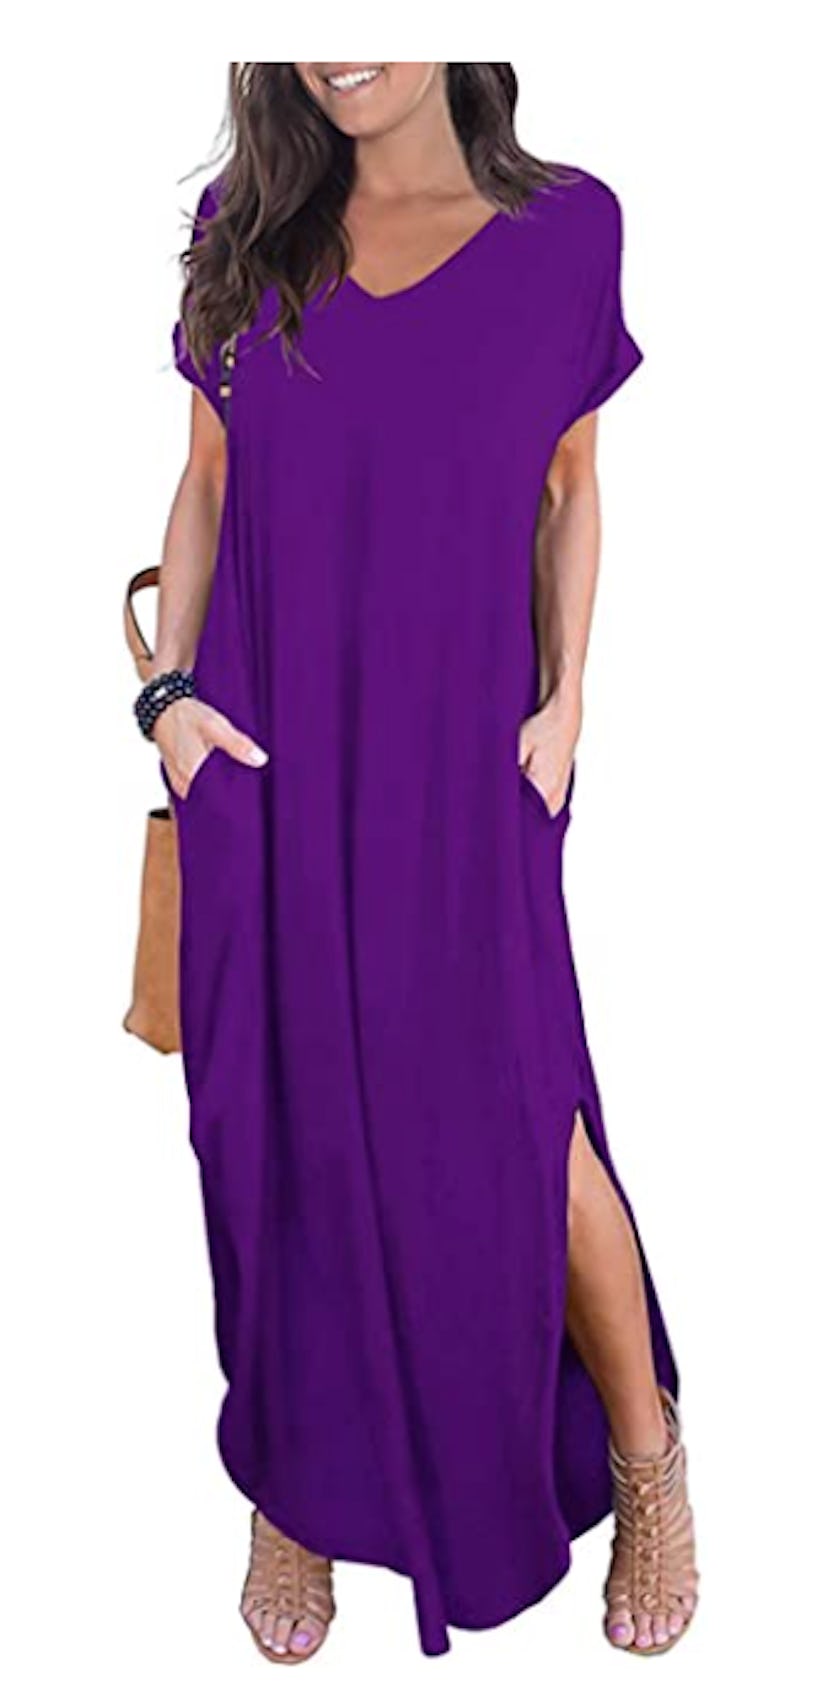 An unexpected back cut-out gives this comfy maxi dress added interest.